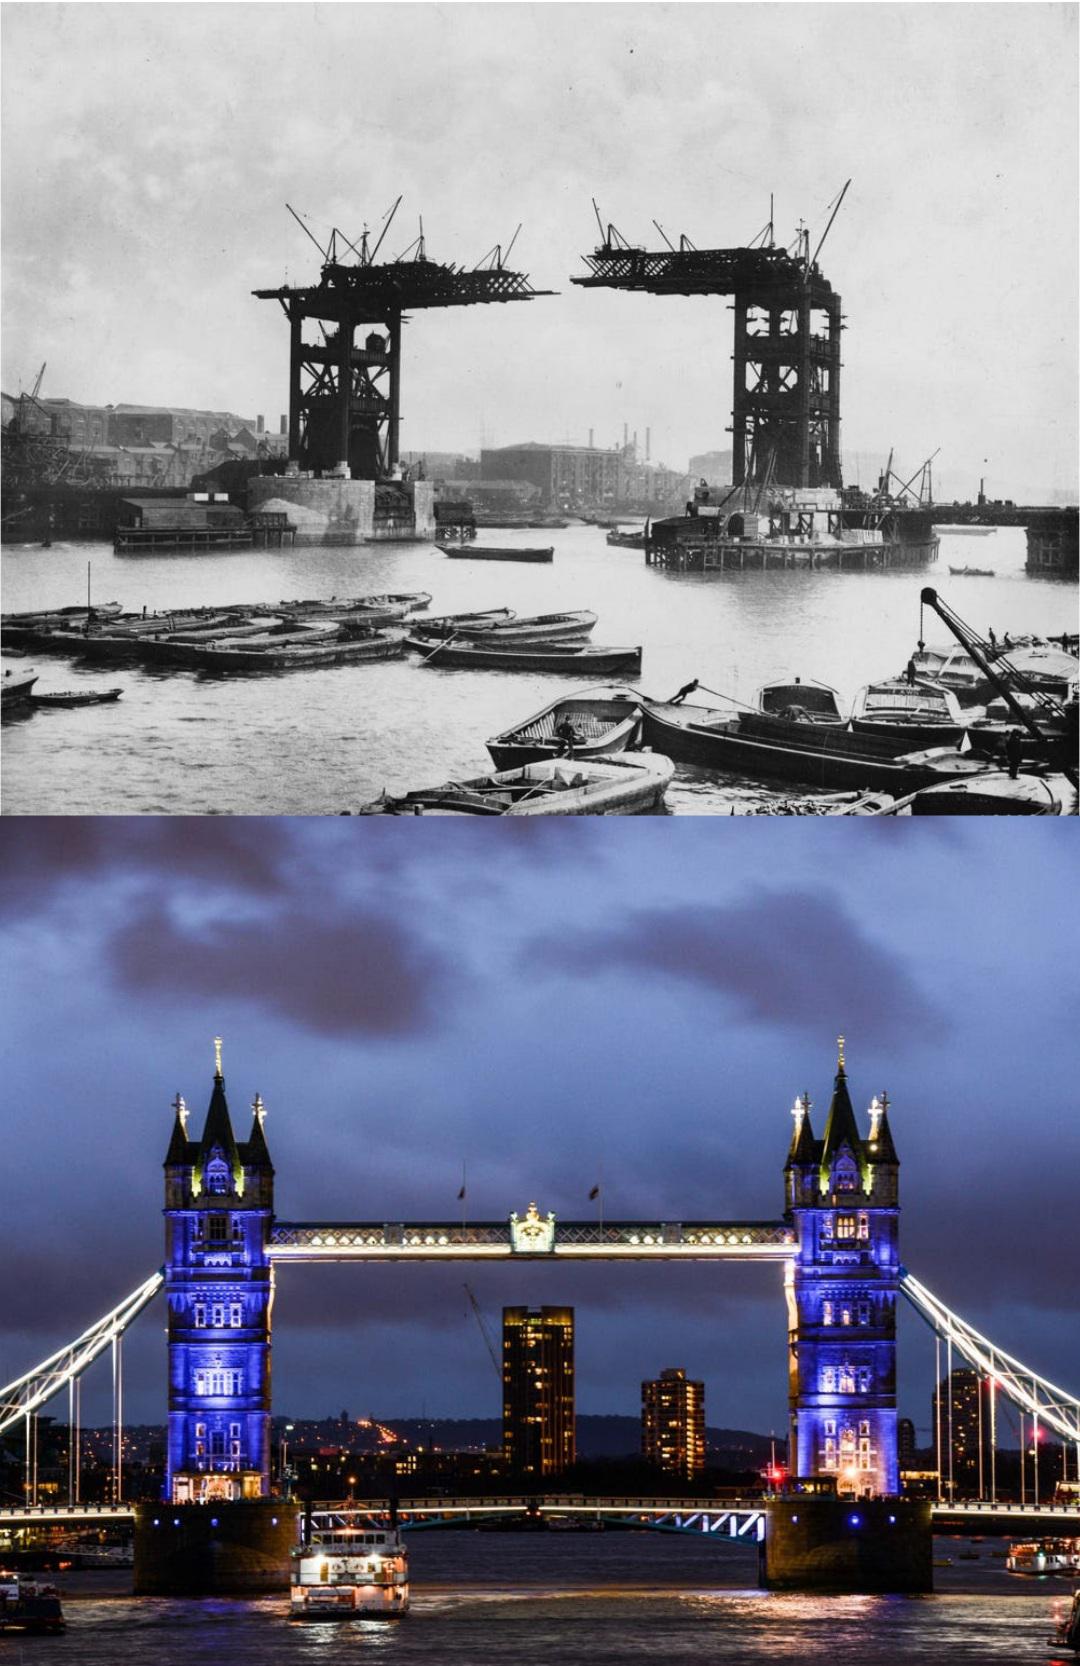 Construction on the Tower Bridge, which took eight years to complete, began in 1886.jpg